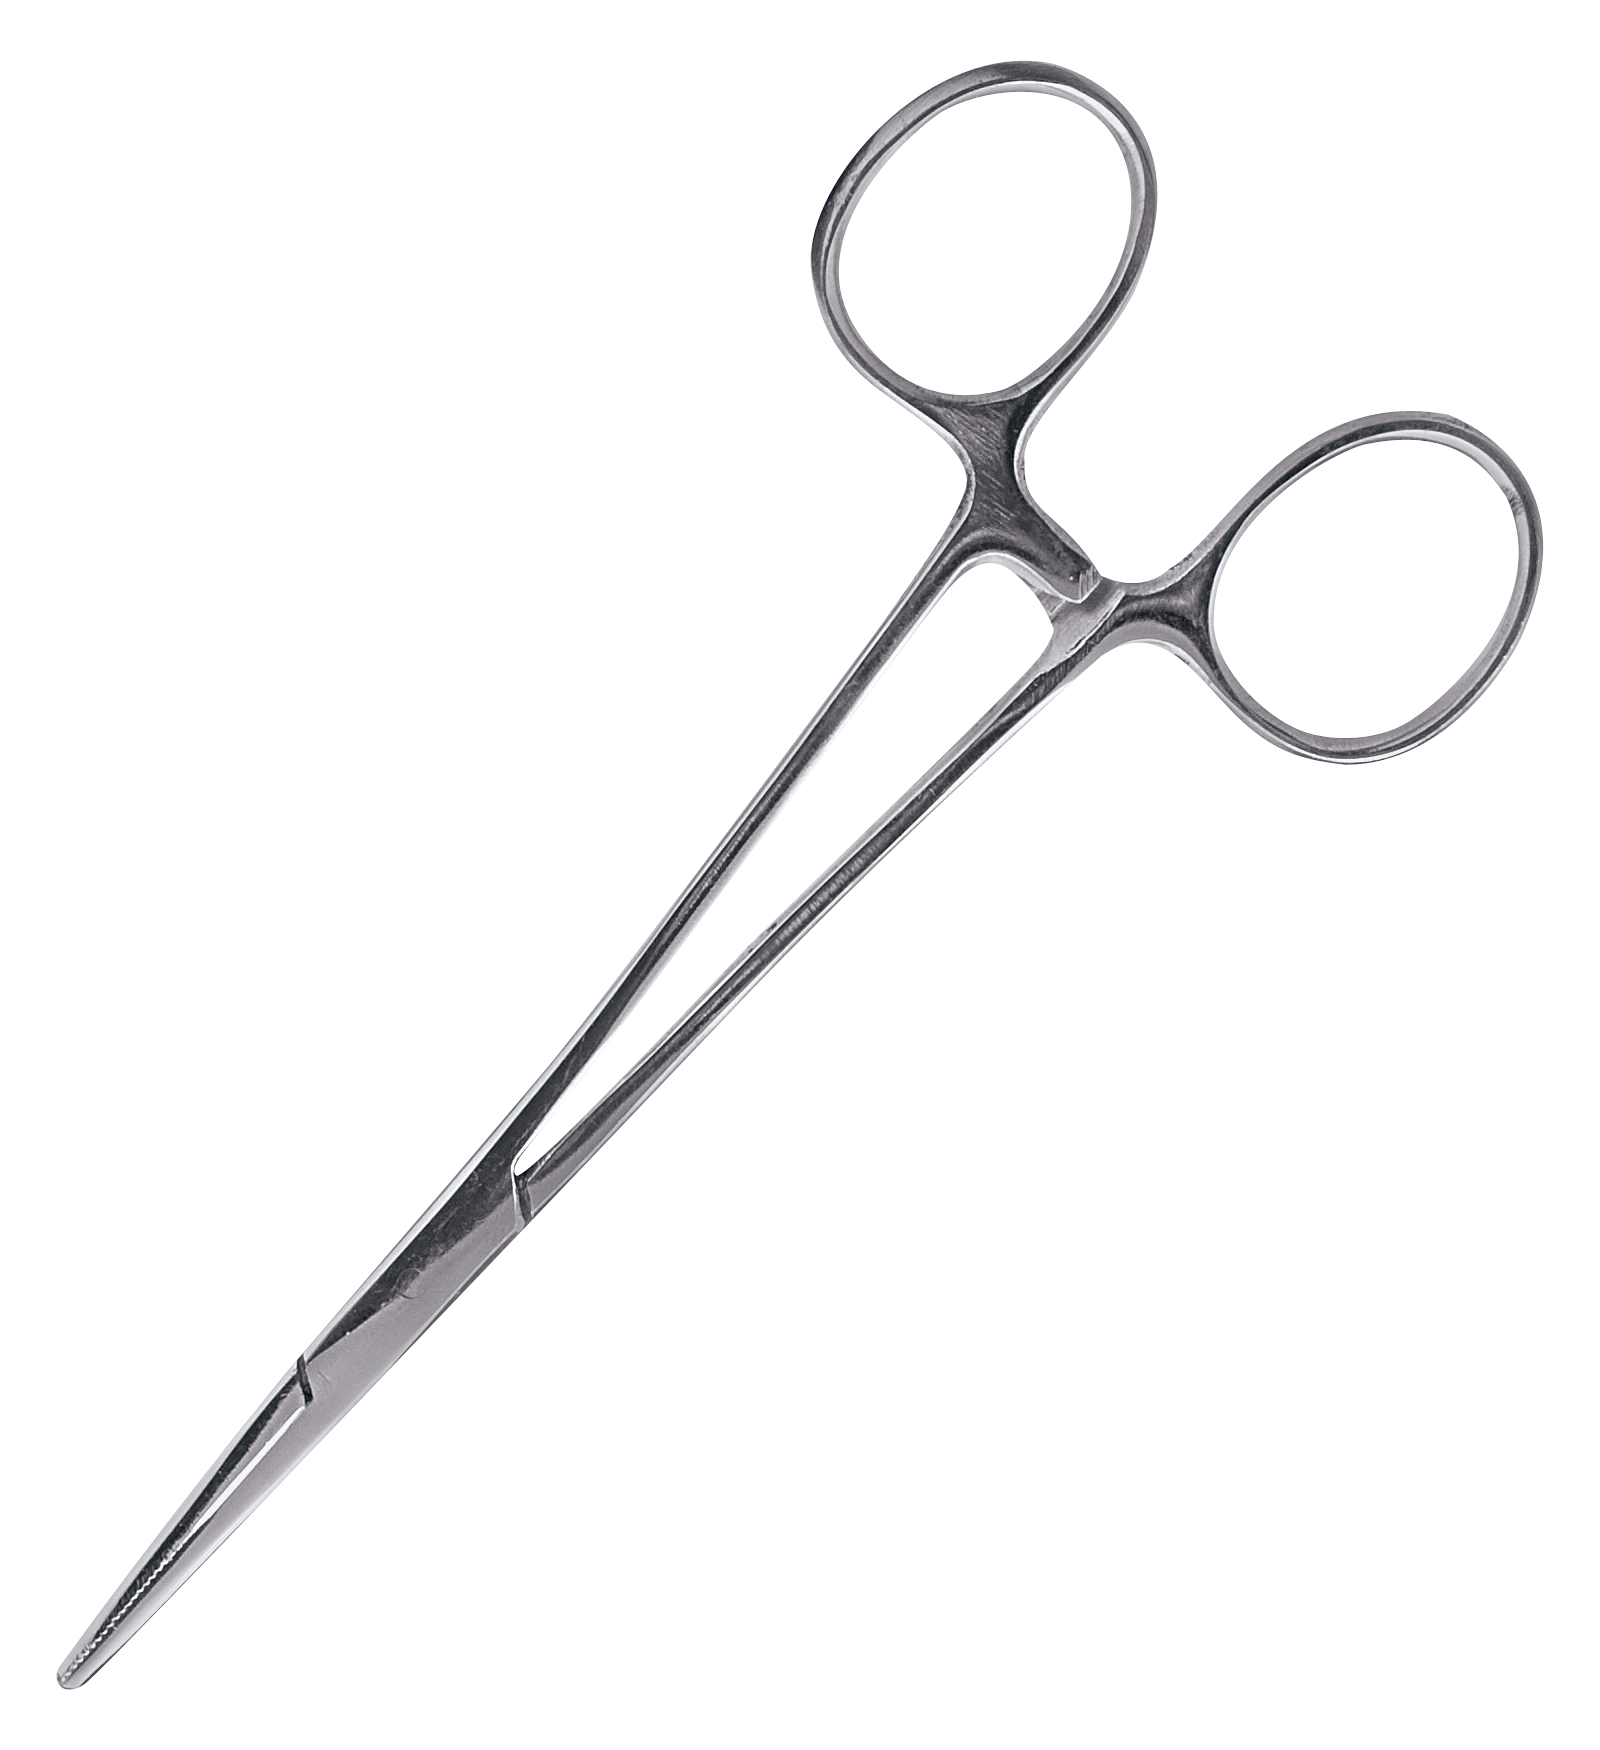 TroutSkins 5 Inch Forceps, Fly Fishing Accessories: Store Name